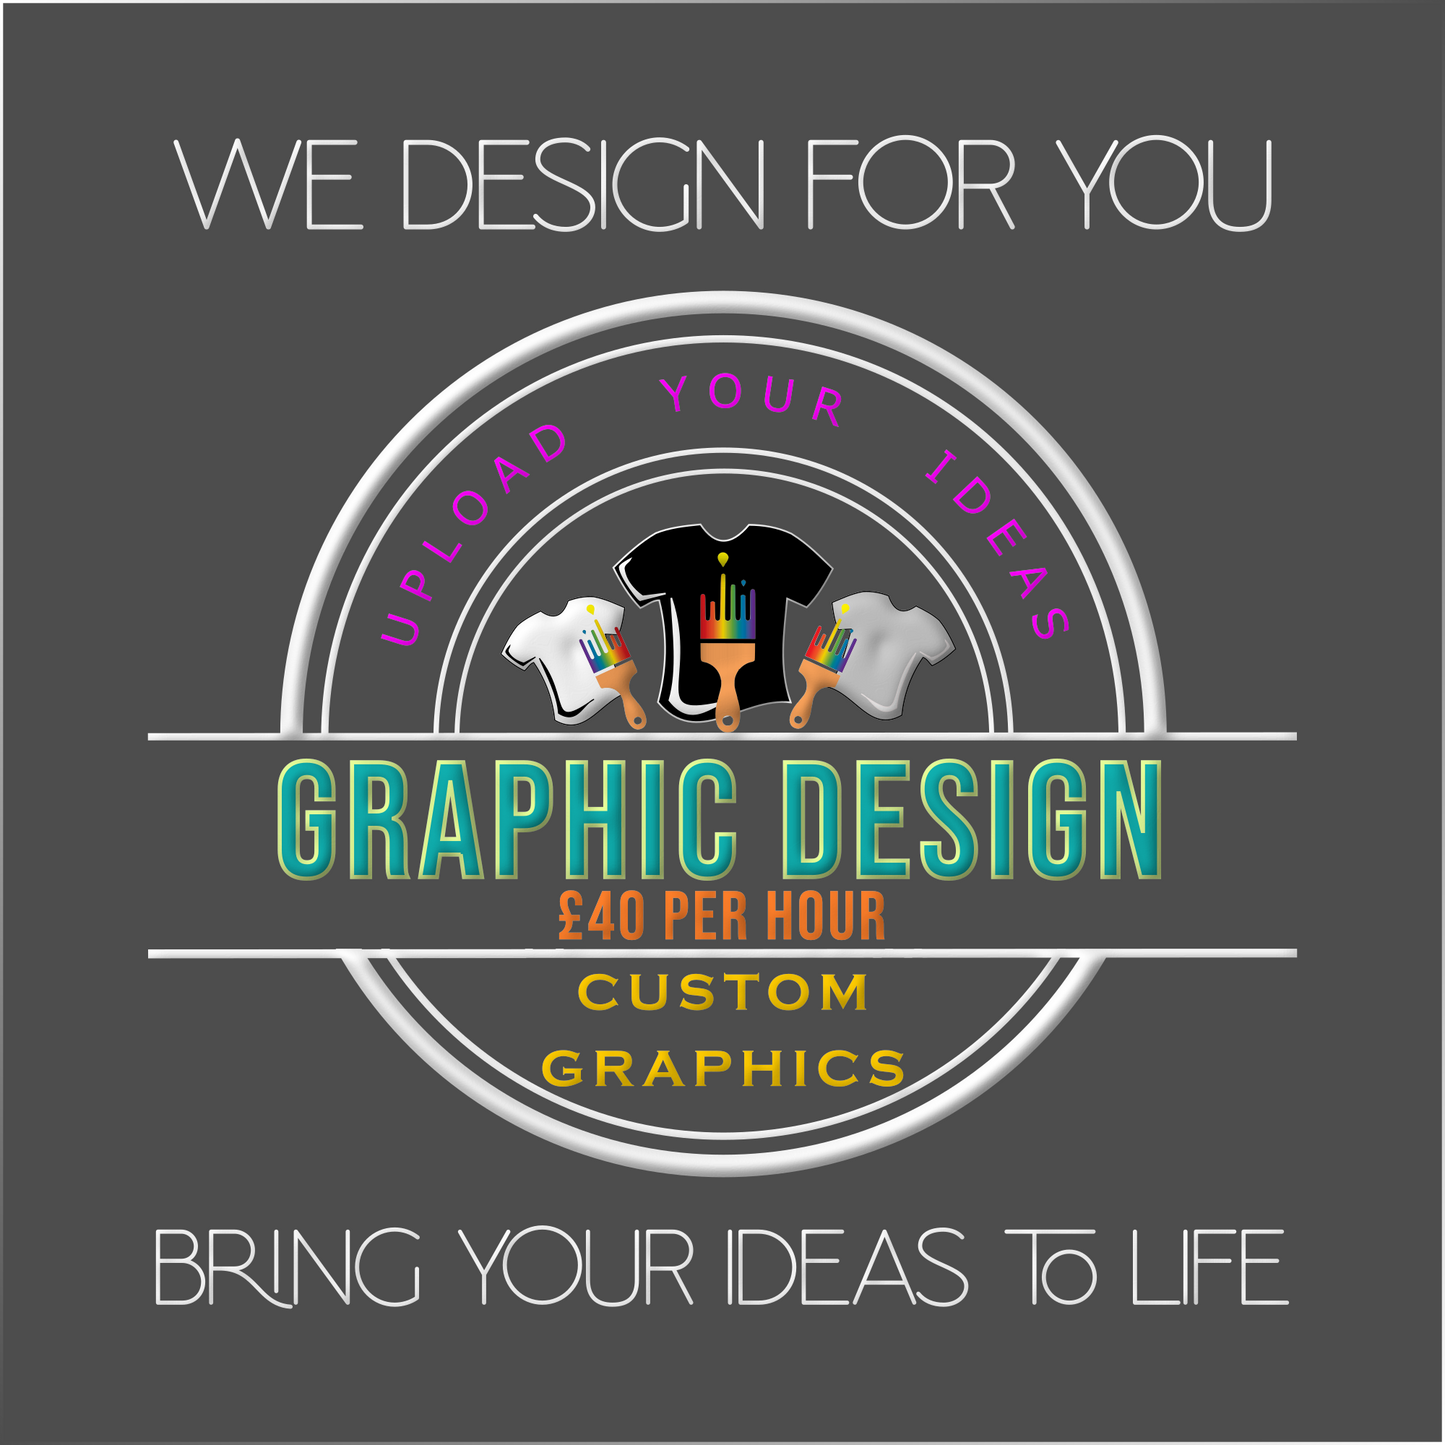 Graphic Design Digital Creation by Us